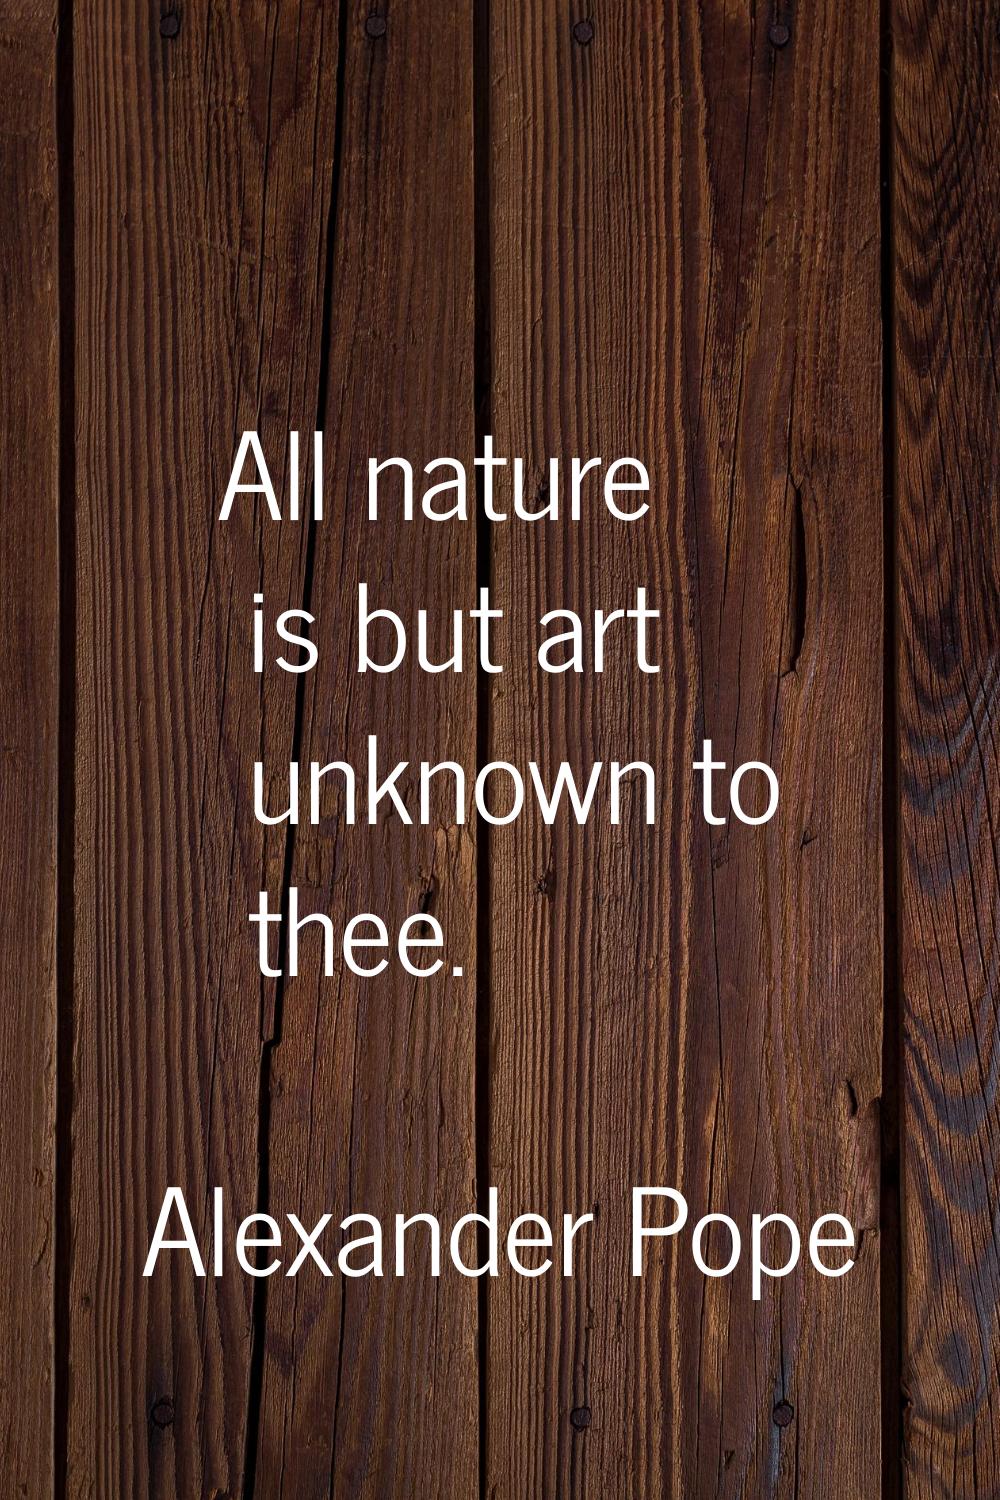 All nature is but art unknown to thee.